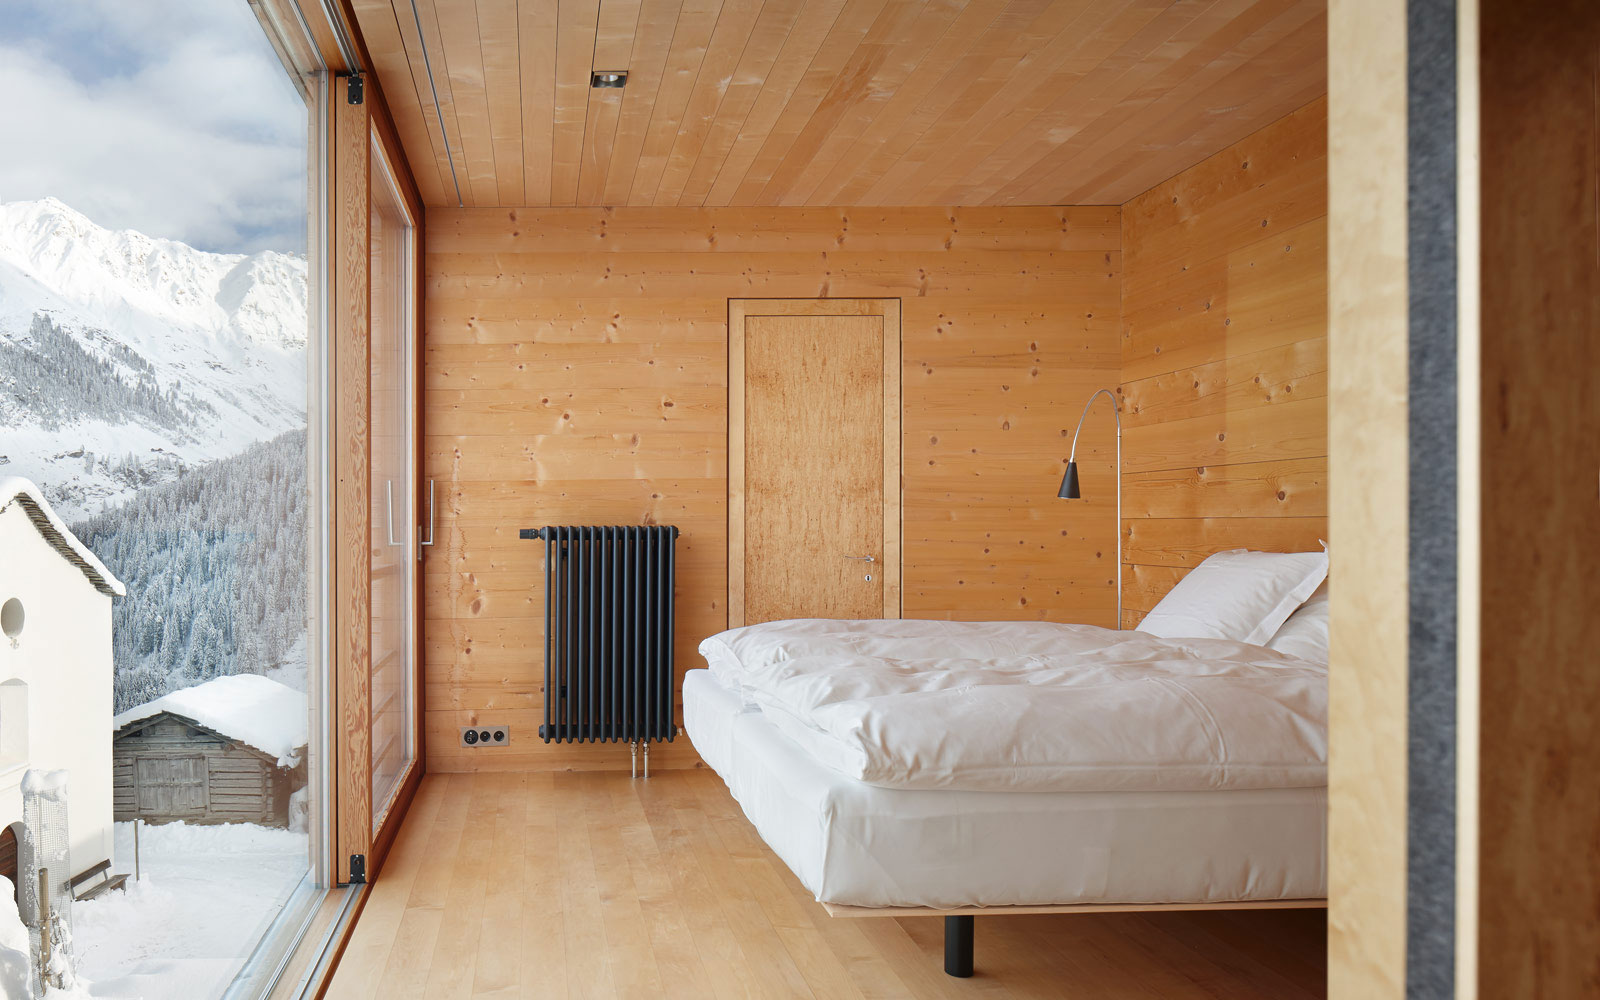 Bedroom Design Vacation Wondrous Bedroom Design Of Zumthor Vacation Homes With White Bed Linen White Pillows And White Colored Blanket House Designs  Simple Wooden Interior From Zumthor Vacation Home 